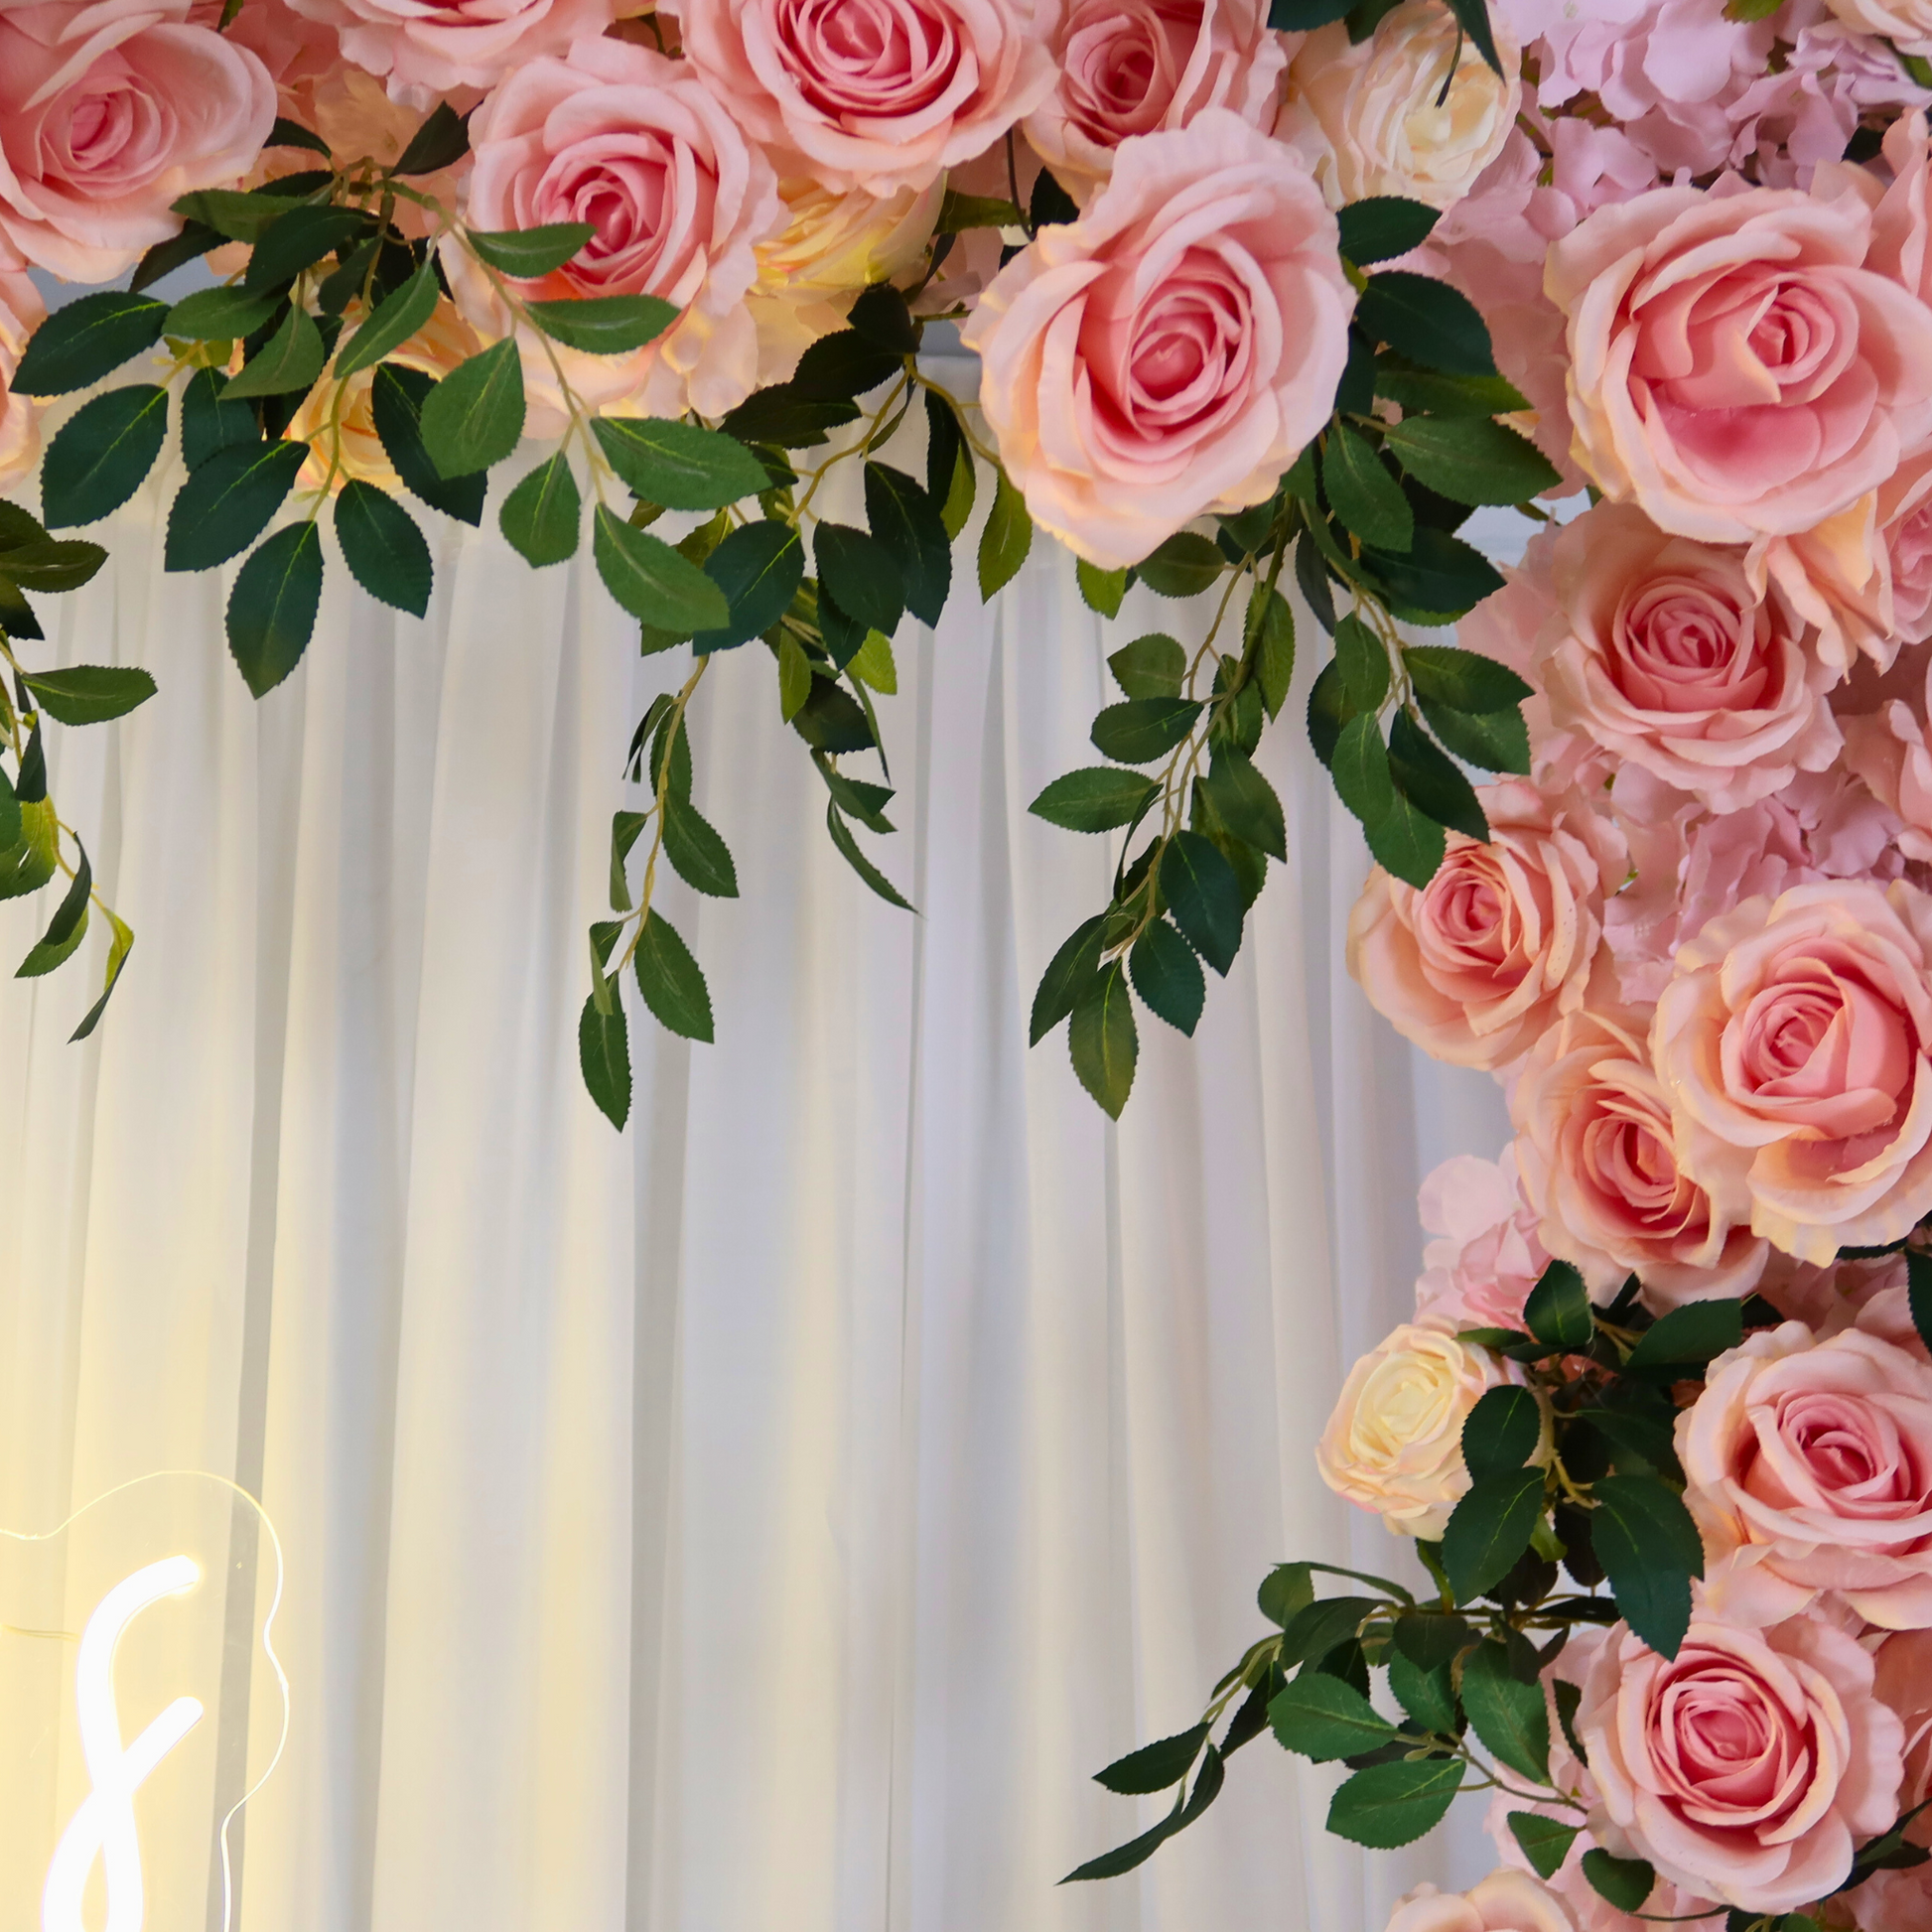 Premade Flower Backdrop Arch/Table Runner Decor - Pink